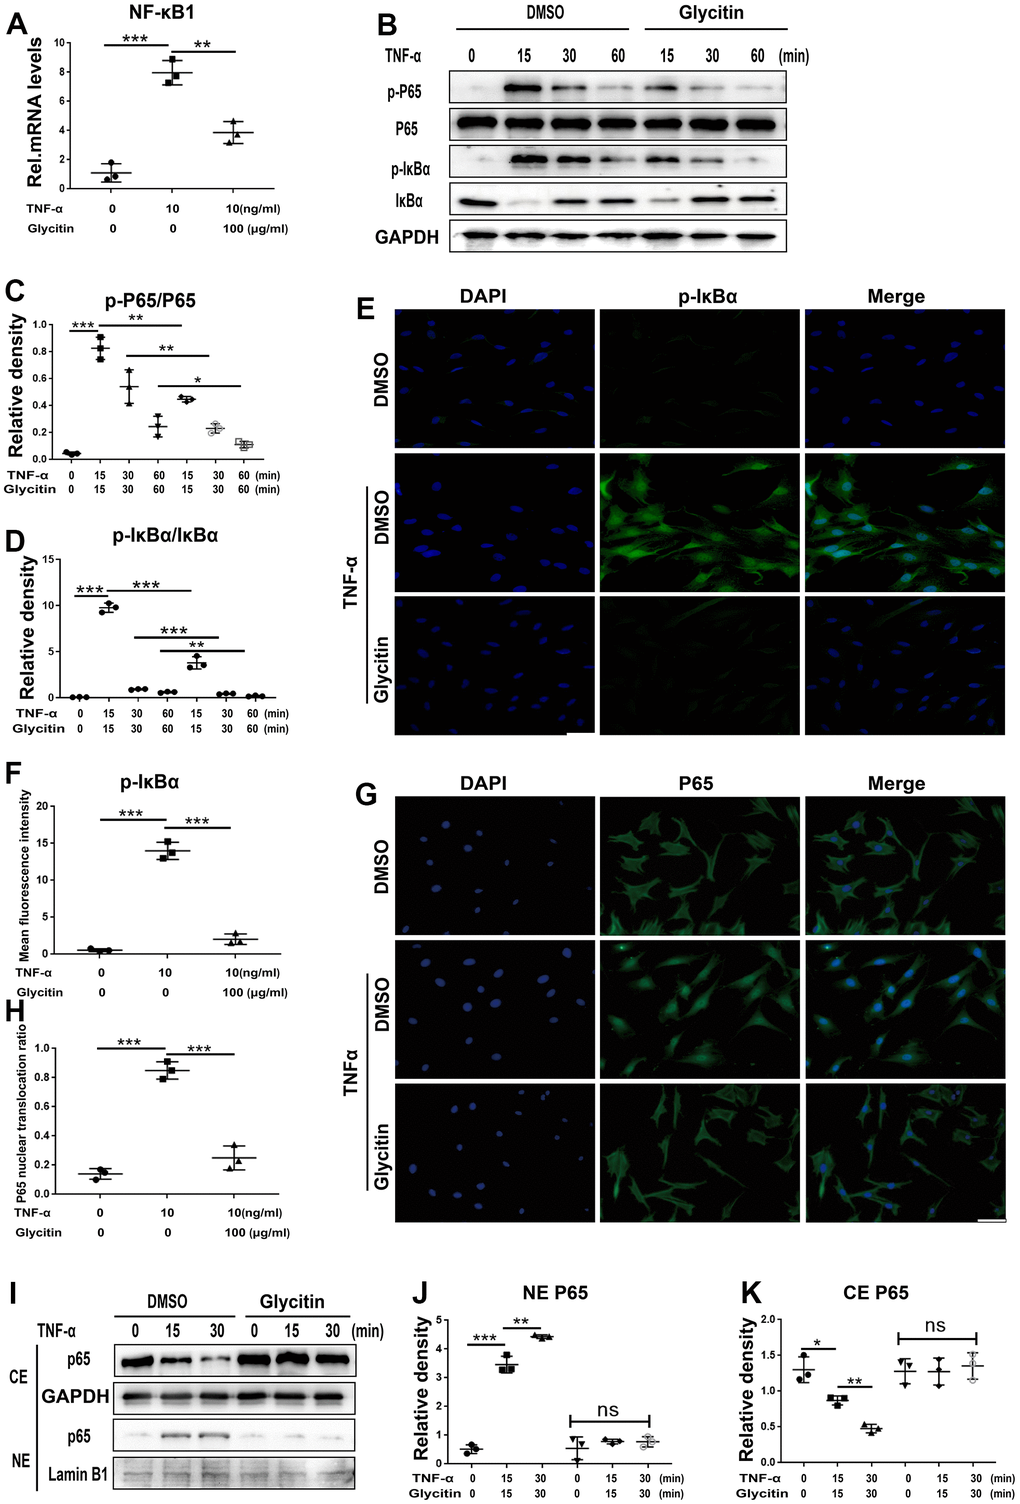 Glycitin antagonized the activation of the NF-κB signaling pathway. (A) The NF-κB1 level was assayed via RT-PCR. (B–D) Protein levels of pIκBα and p-P65 were tested by WB method using image J. (E, F) Immunofluorescence to detect pIκBα in HNPCs of each indicated group (n=3). Scale bar, 100 μm. (G, H) The HNPCs were treated with or without Glycitin (100 μg/ml) for 12 hours, and then adding TNF-α (10 ng/mL) for 6 h. Immunofluorescence cell staining was applied to determine the p65 location. Scale bar: 100 μm. (I–K) Nuclear translocation of p65 were determined by WB analysis using ImageJ. The values represent the mean ± SD of three independent experiments. *p 